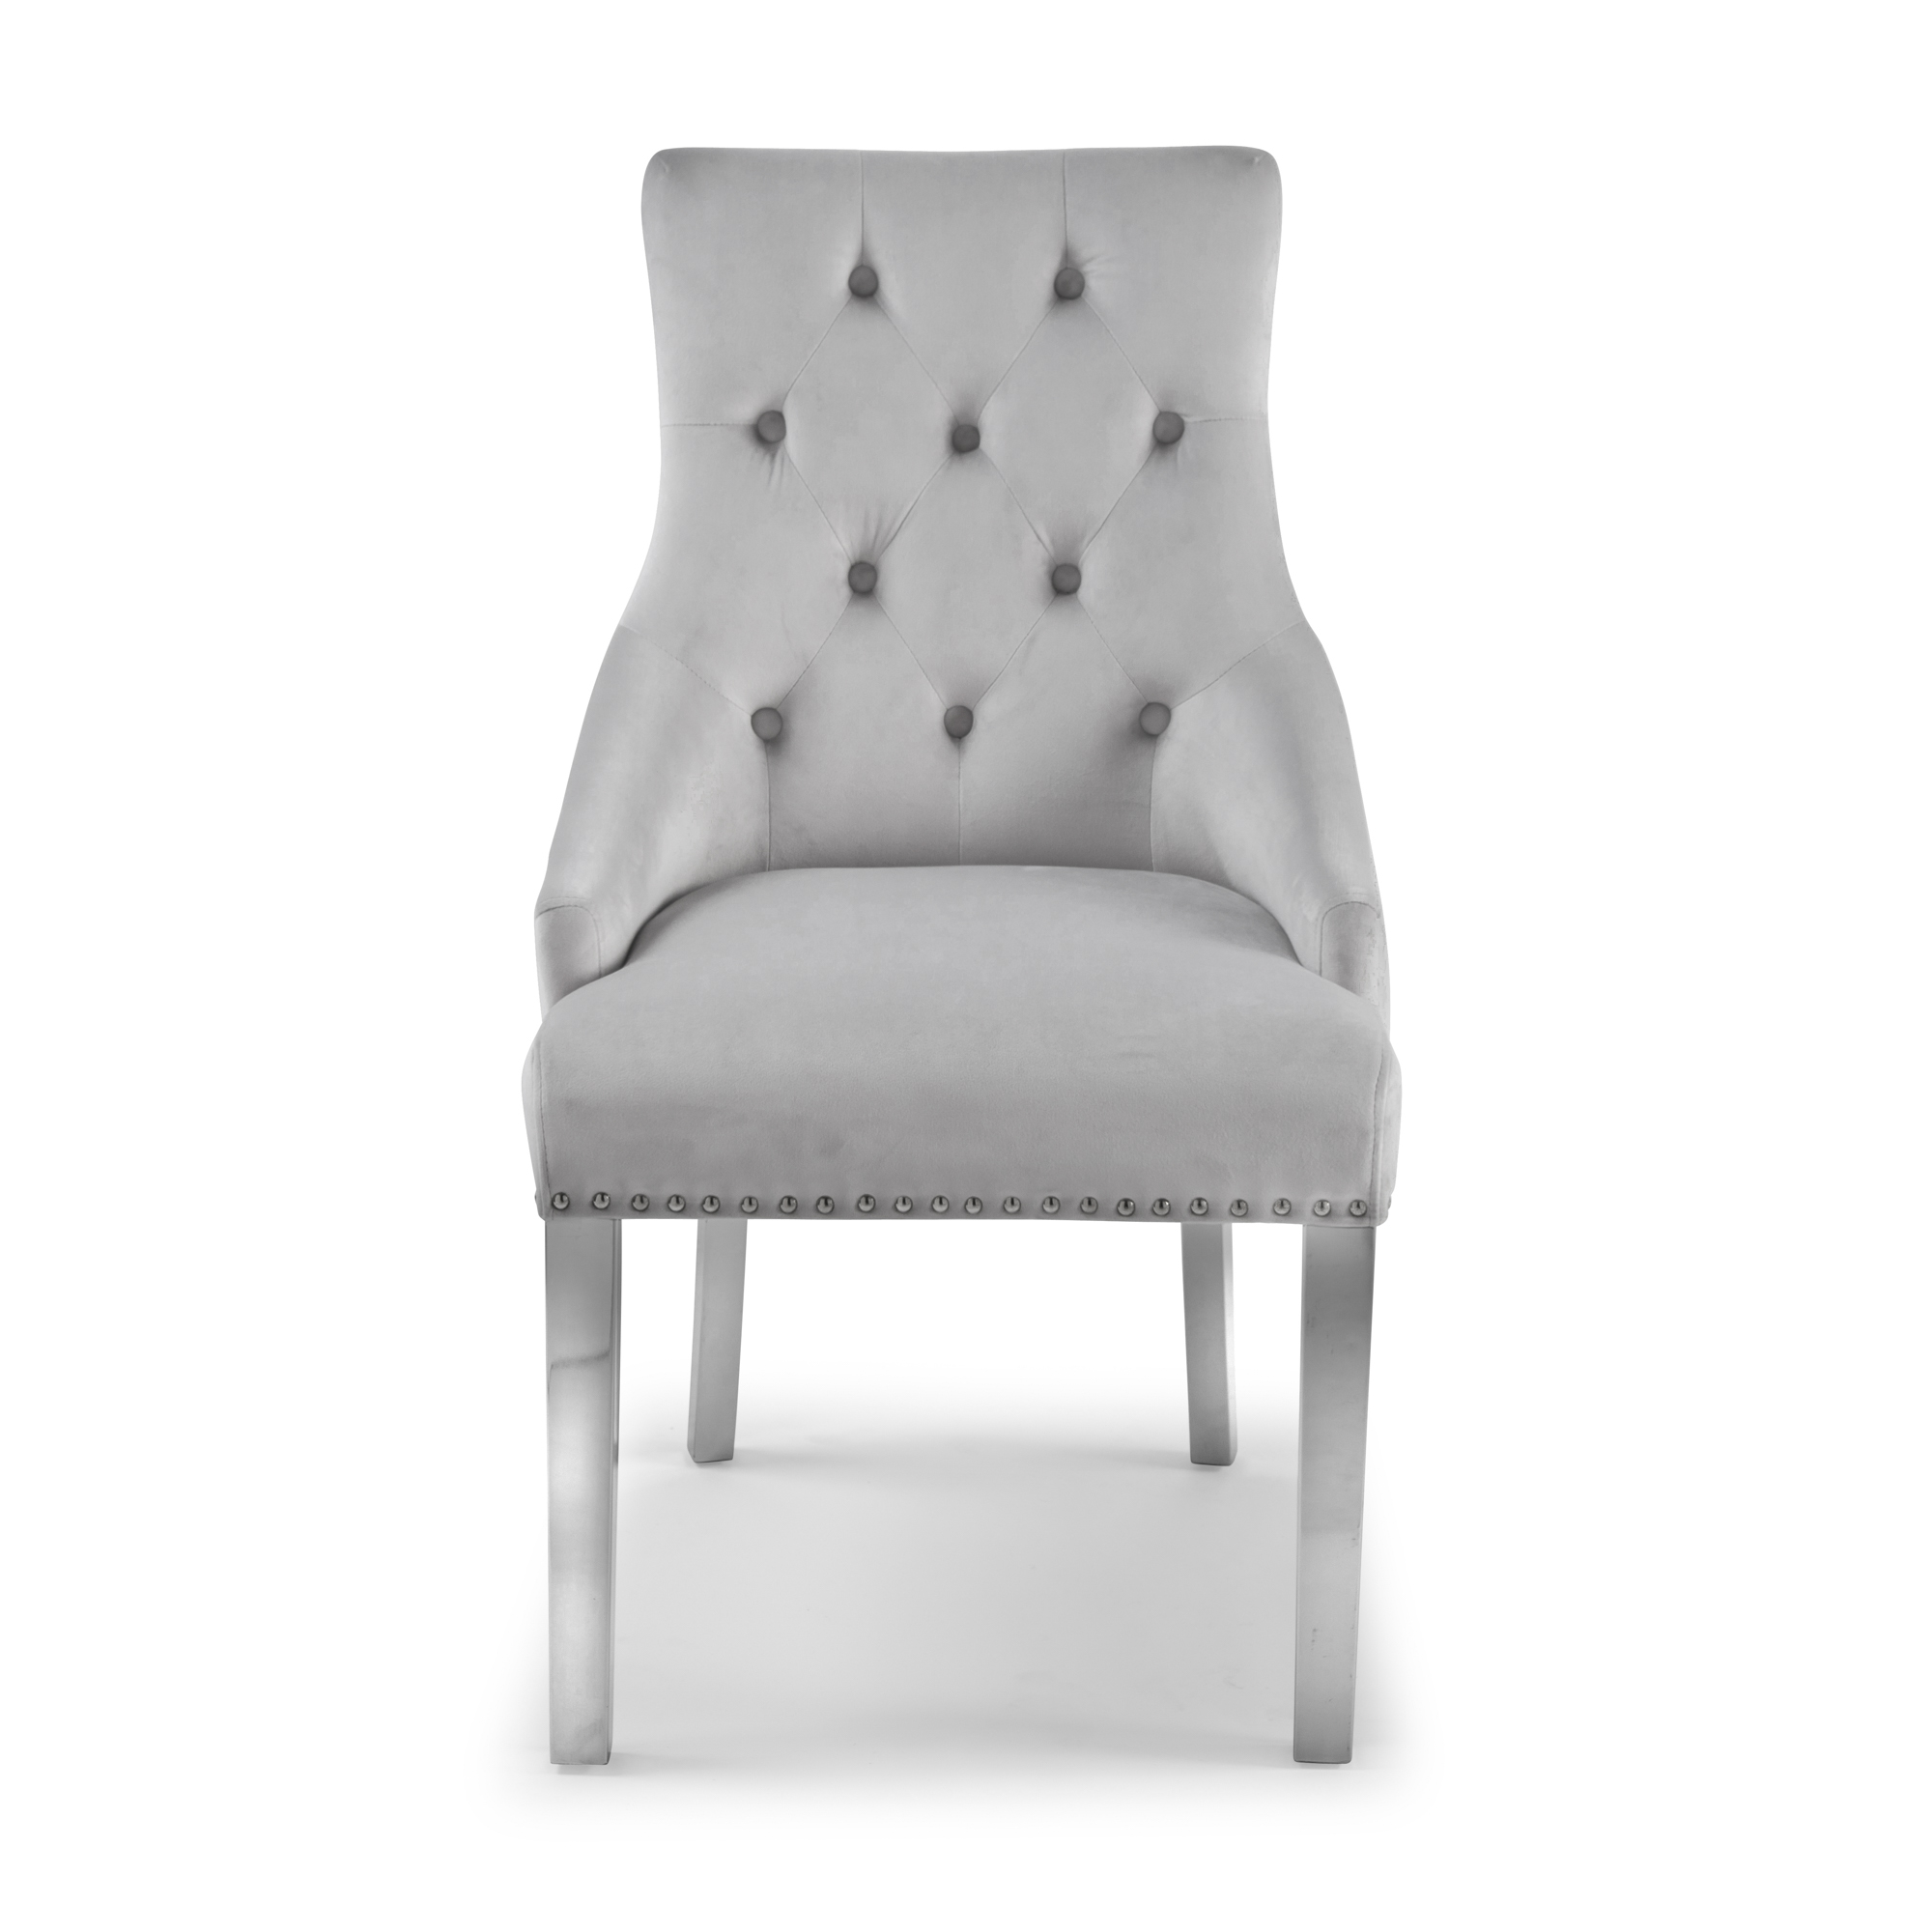 Dove Grey Brushed Velvet Upholstered Scoop Dining Chair with Hoop – Set of